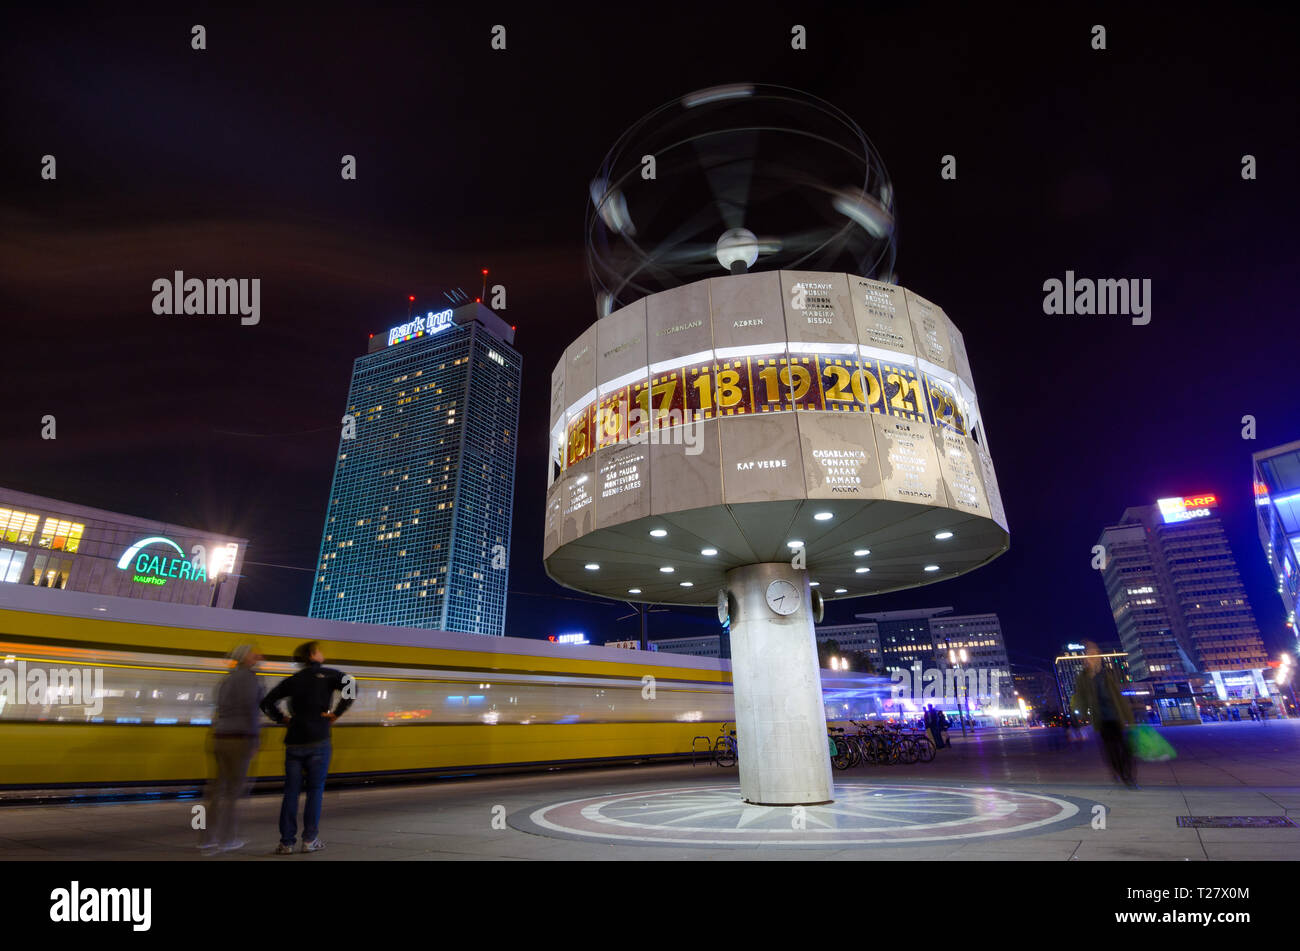 BERLIN, GERMANY - 9 Nov 2012: Weltzeituhr, the worldtime clock at night, with a tram passing and bystanders, in Alexanderplatz, Berlin, Germany. Stock Photo